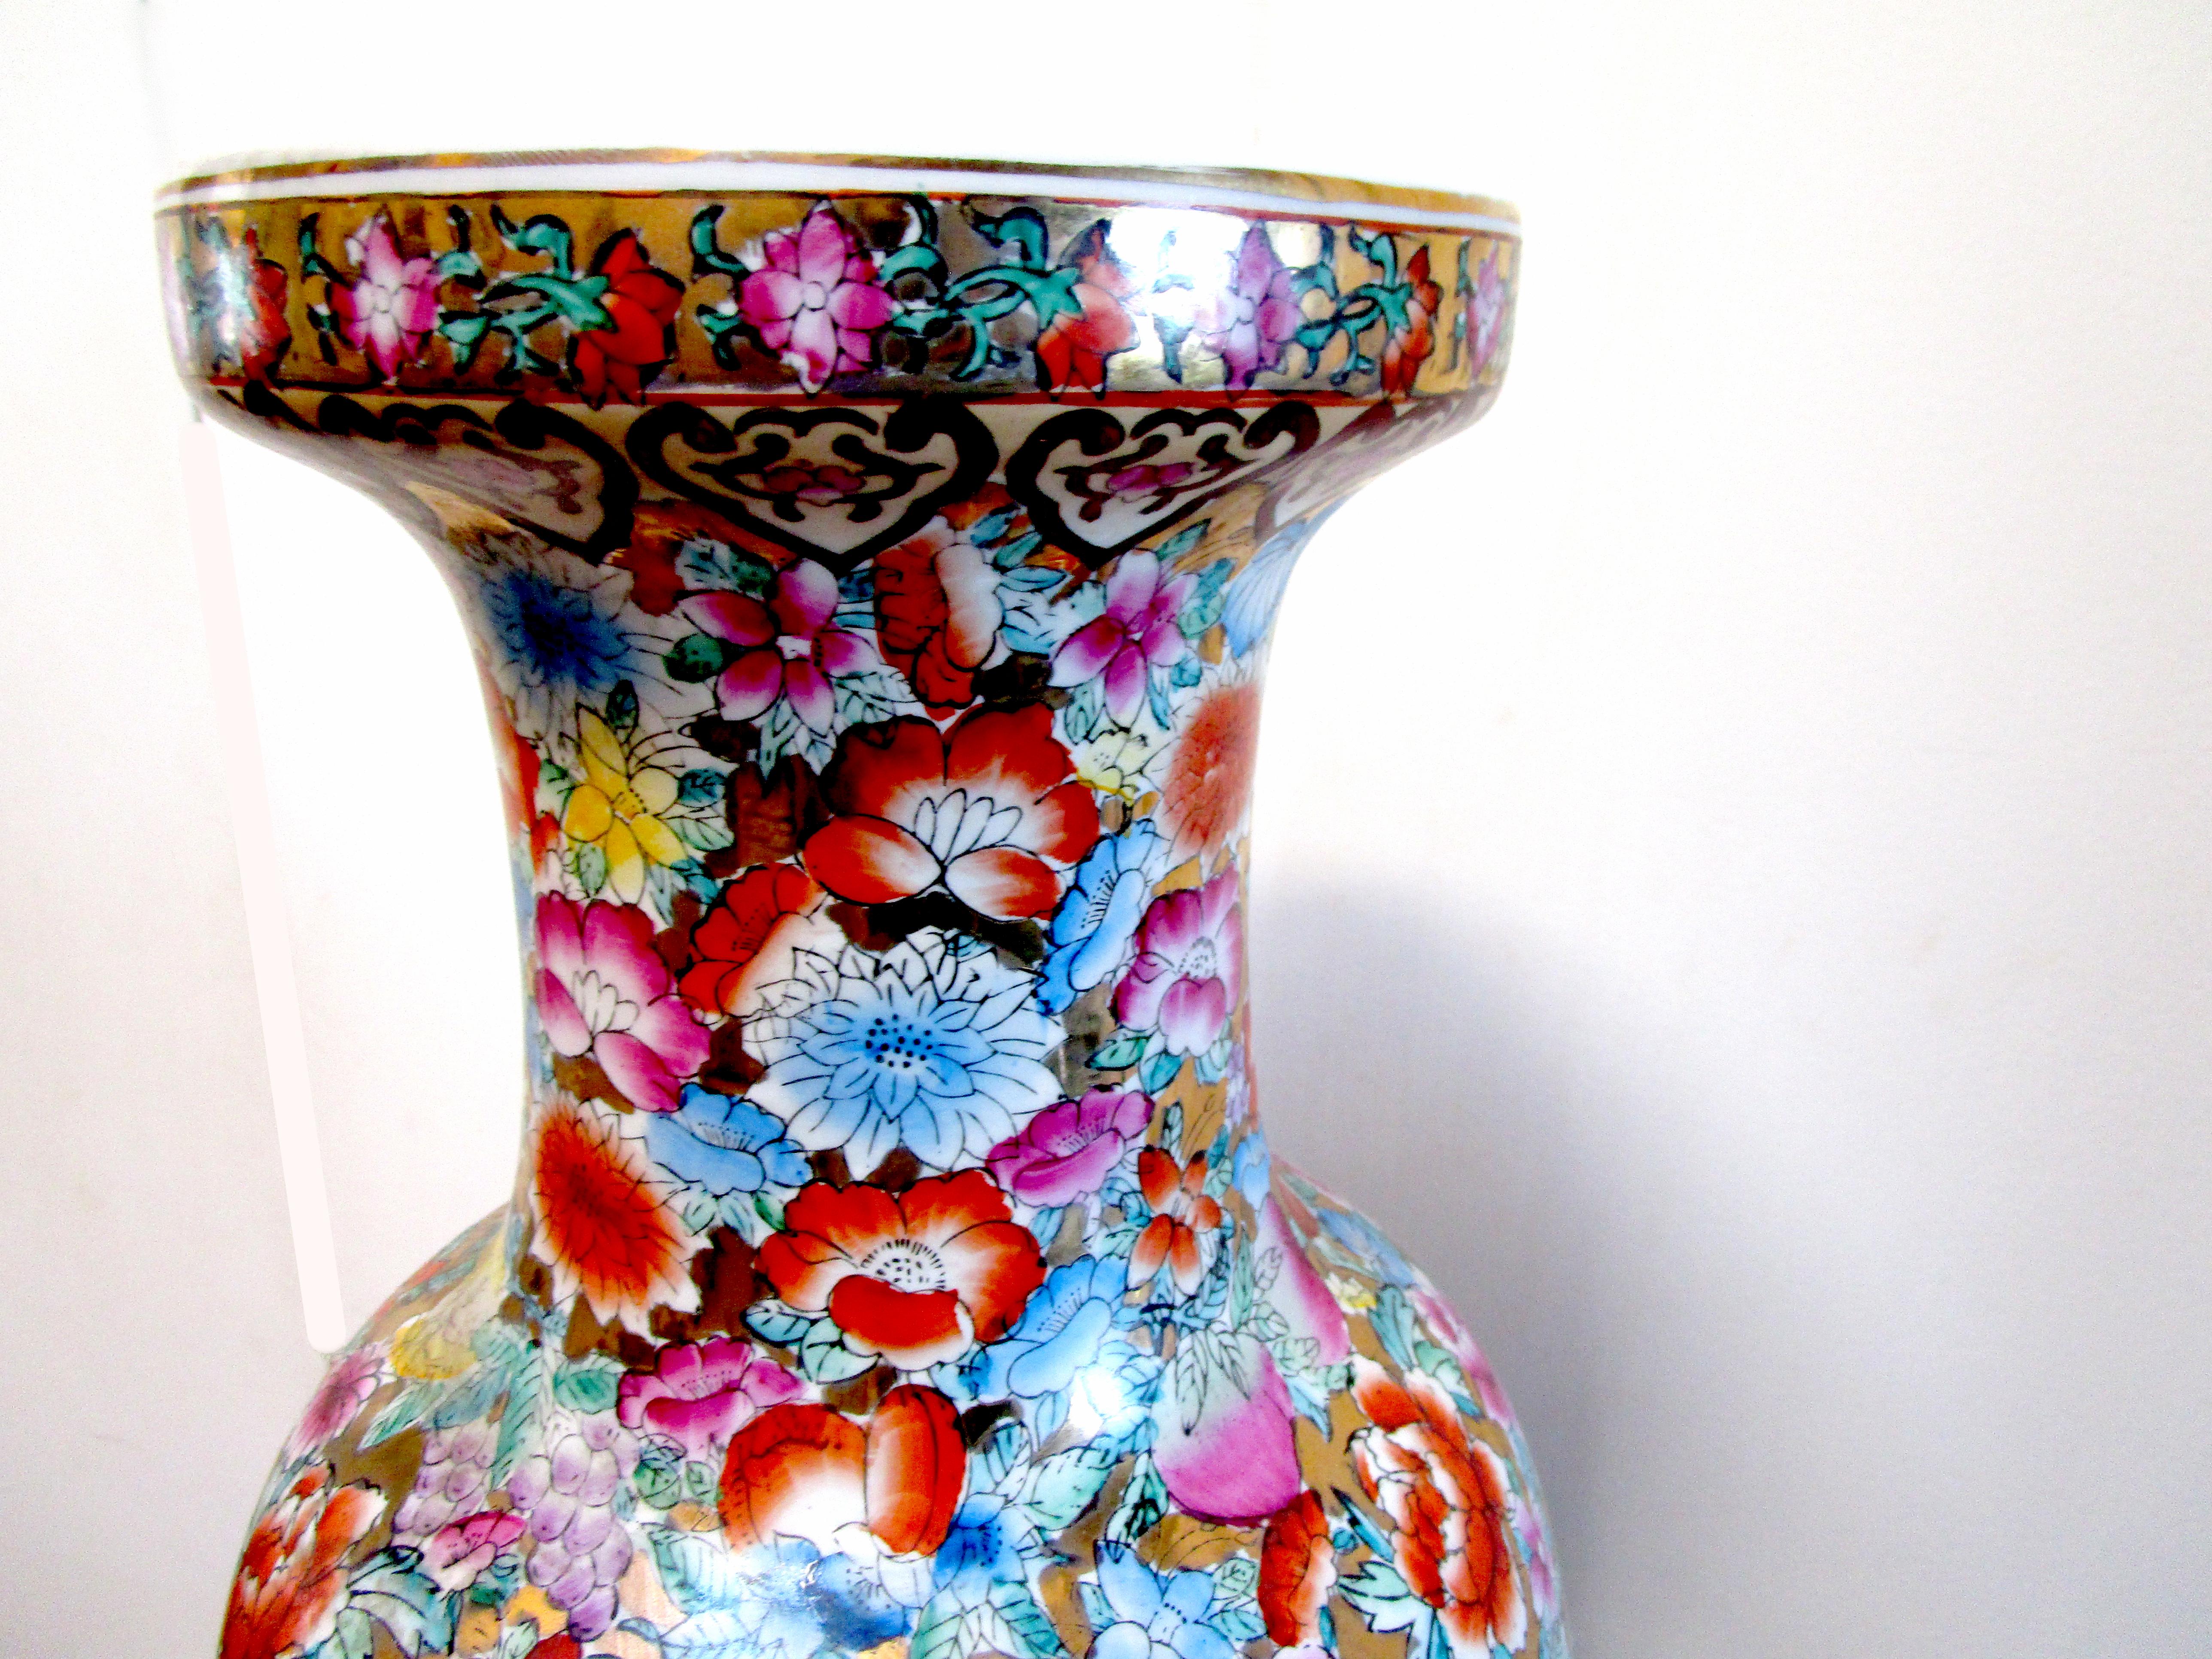 1920s Mille Fiori Chinese Export Parcel Gilt Monumental Rouleau Vase For Sale 4